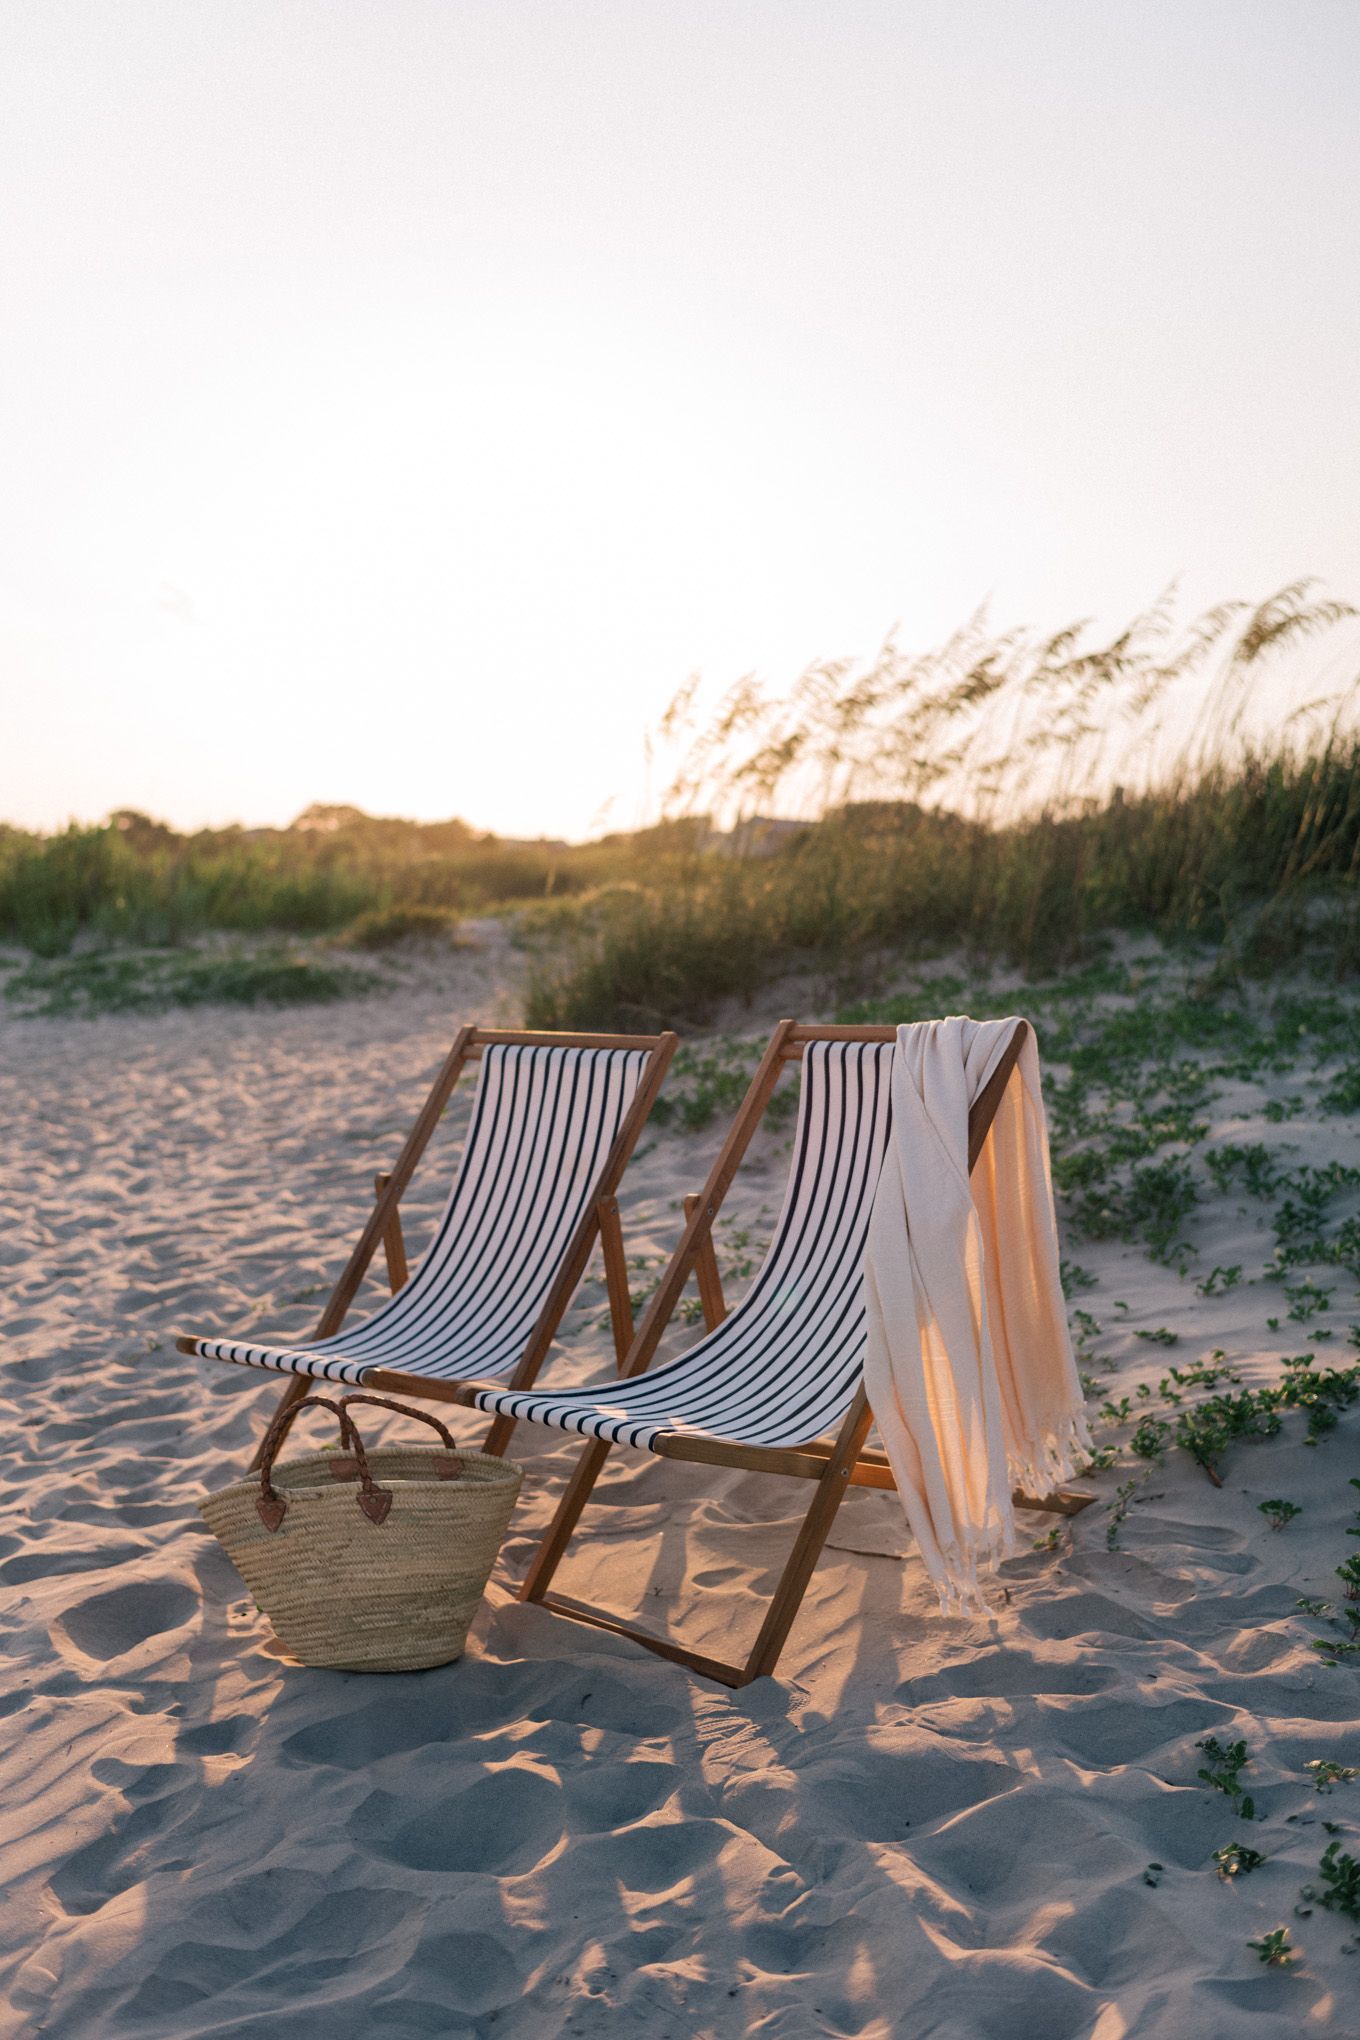 Seaside Serenity: Relaxing with Beach Chairs